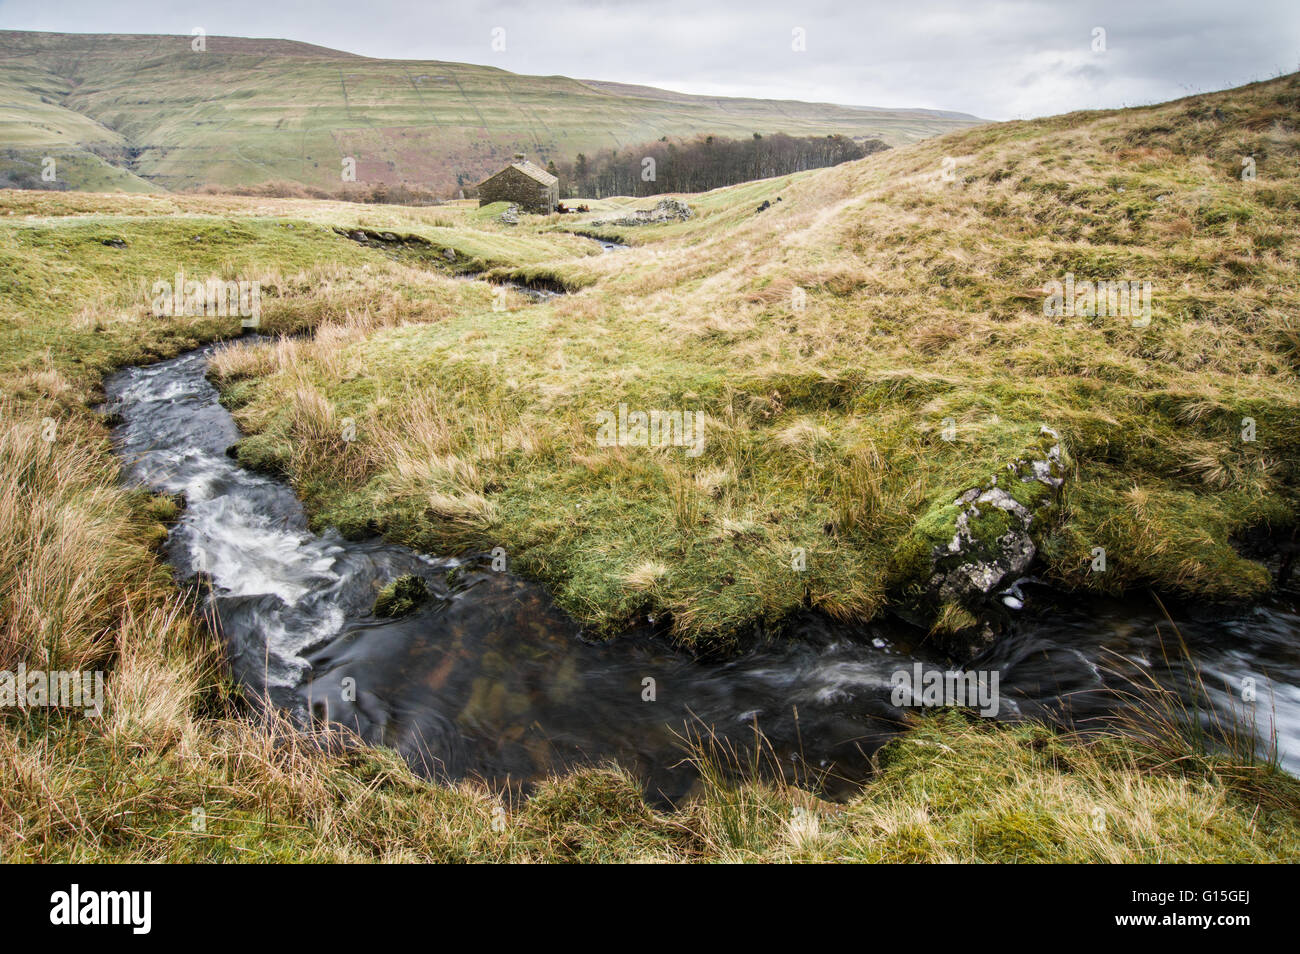 Stream and cottage, above Buckden, Wharfedale, Yorkshire Dales, Yorkshire, England, United Kingdom, Europe Stock Photo